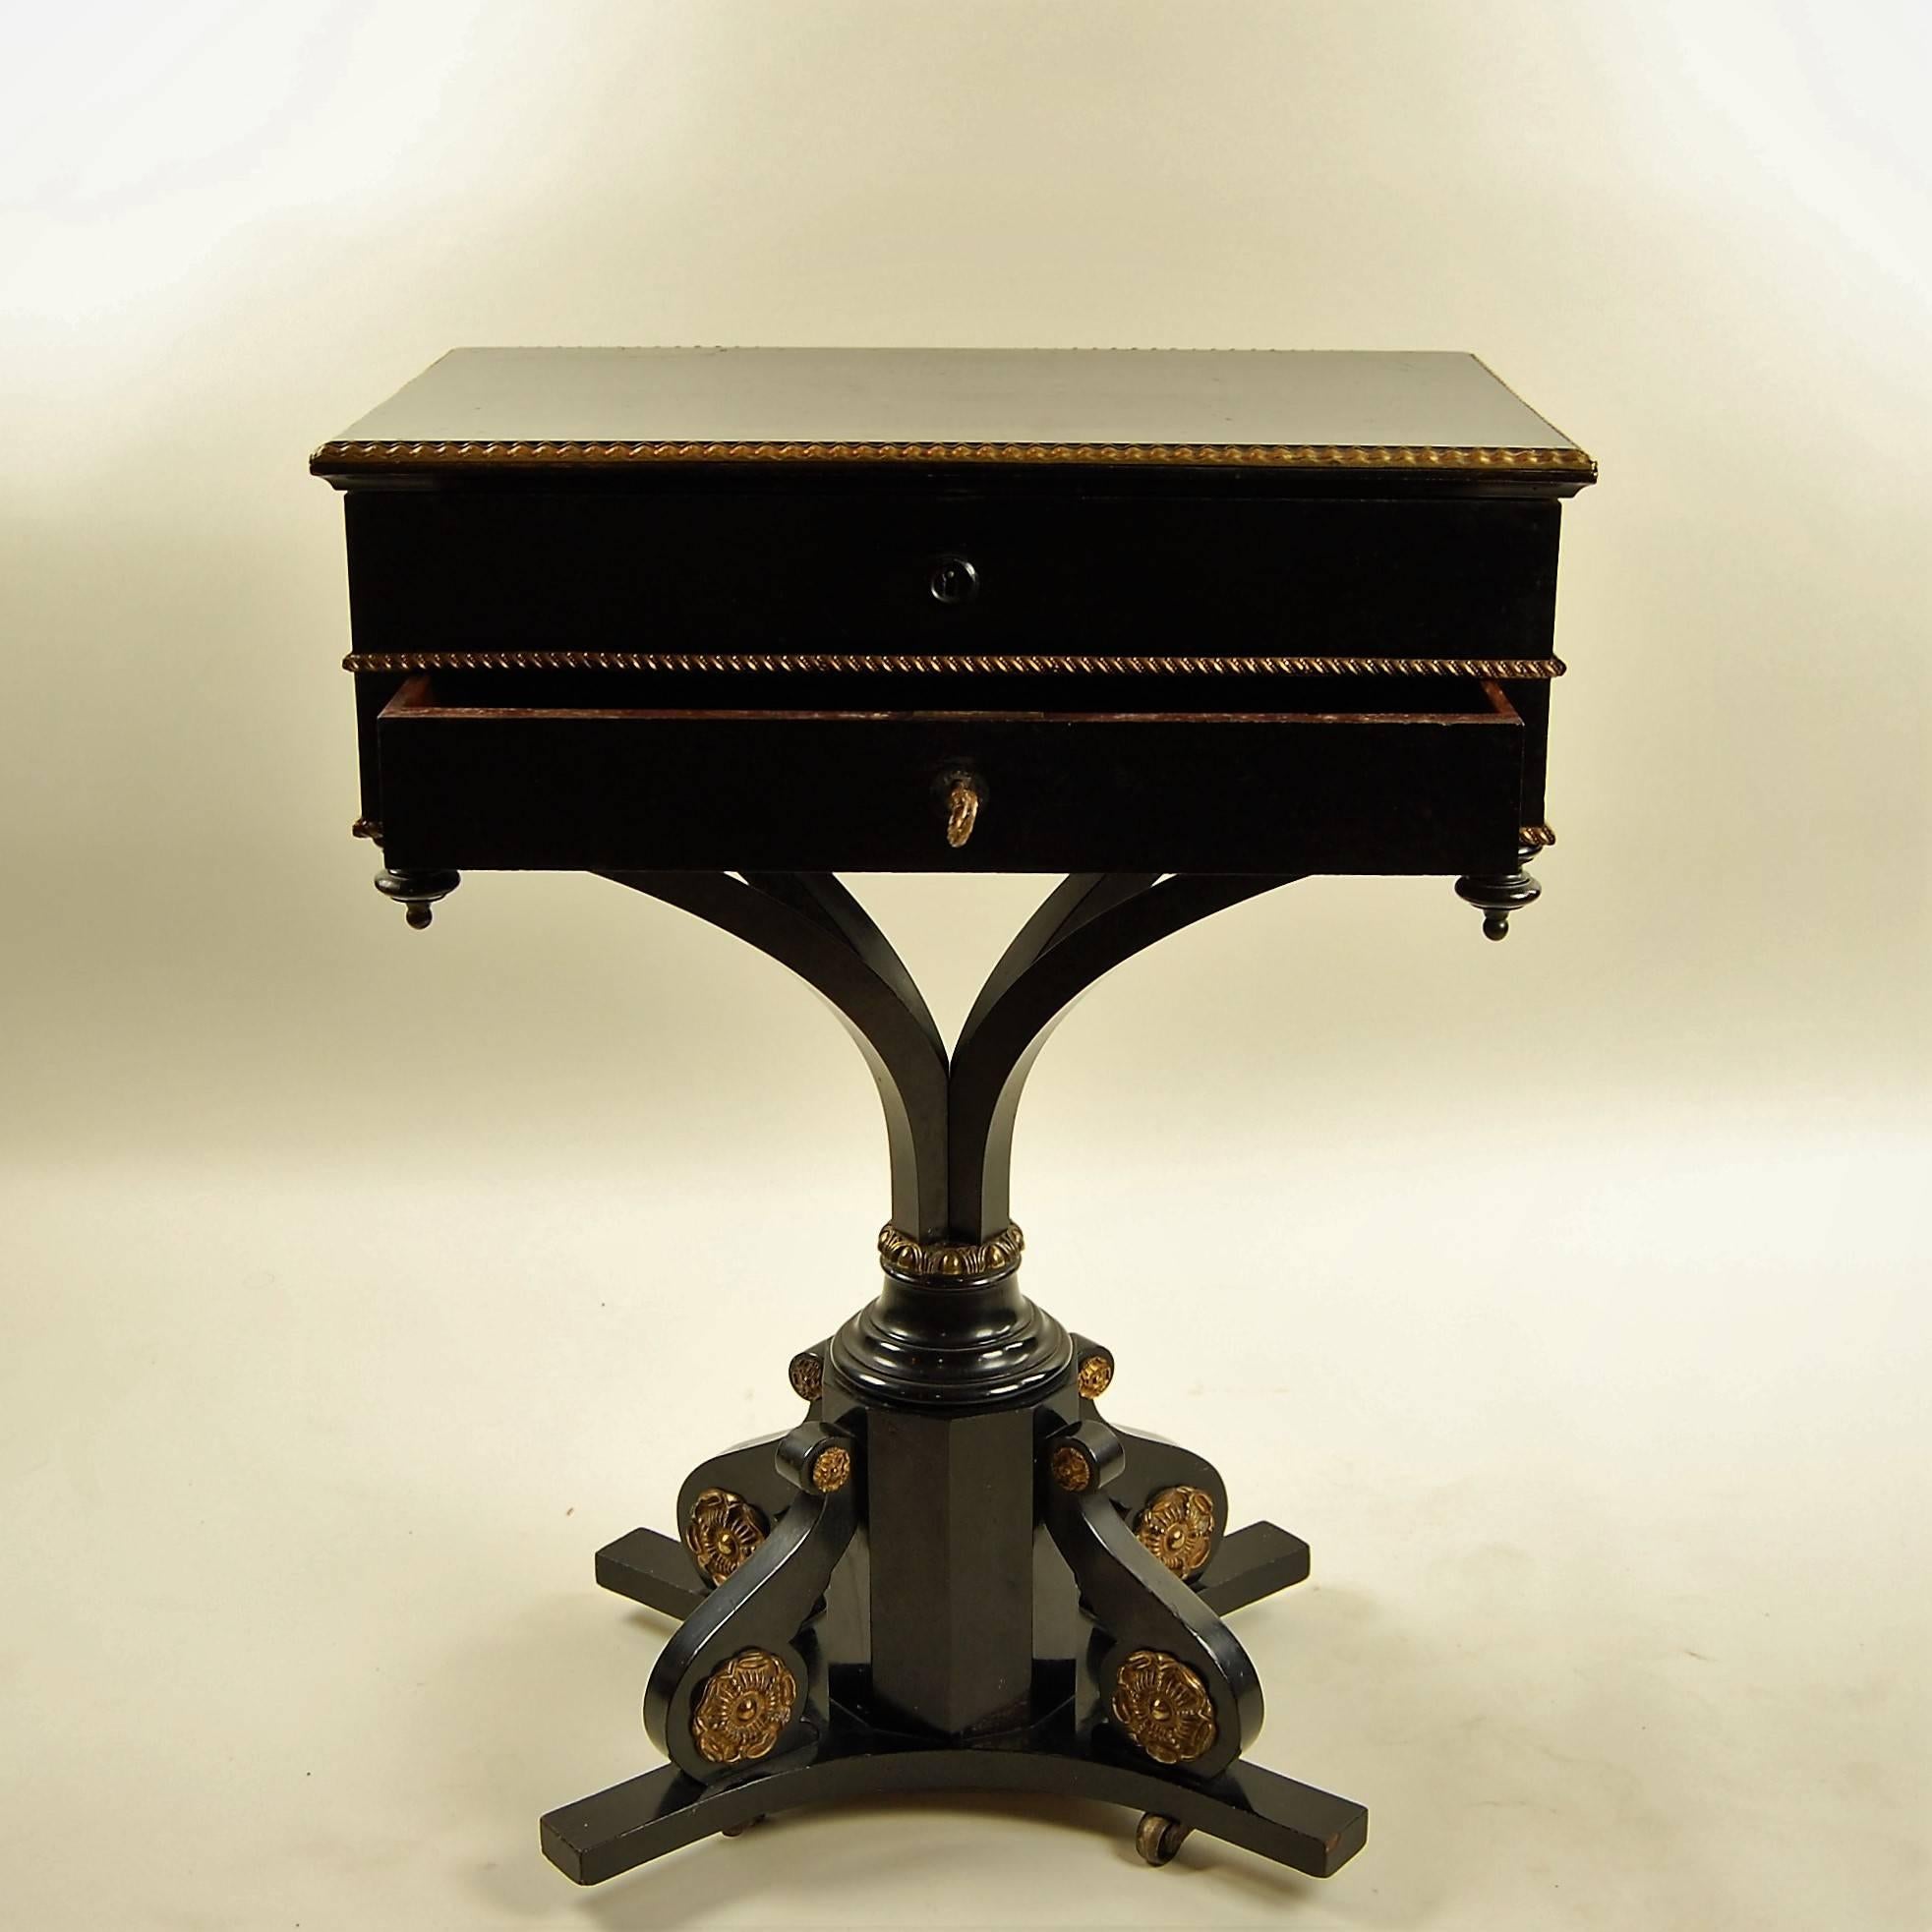 A useful accessory for a 19th-century parlor or drawing room, this charming little table features a rich ebony finish with gilded accents. Rosette detail add interest to the bottom center pedestal. Two locking drawers (key included) provide access